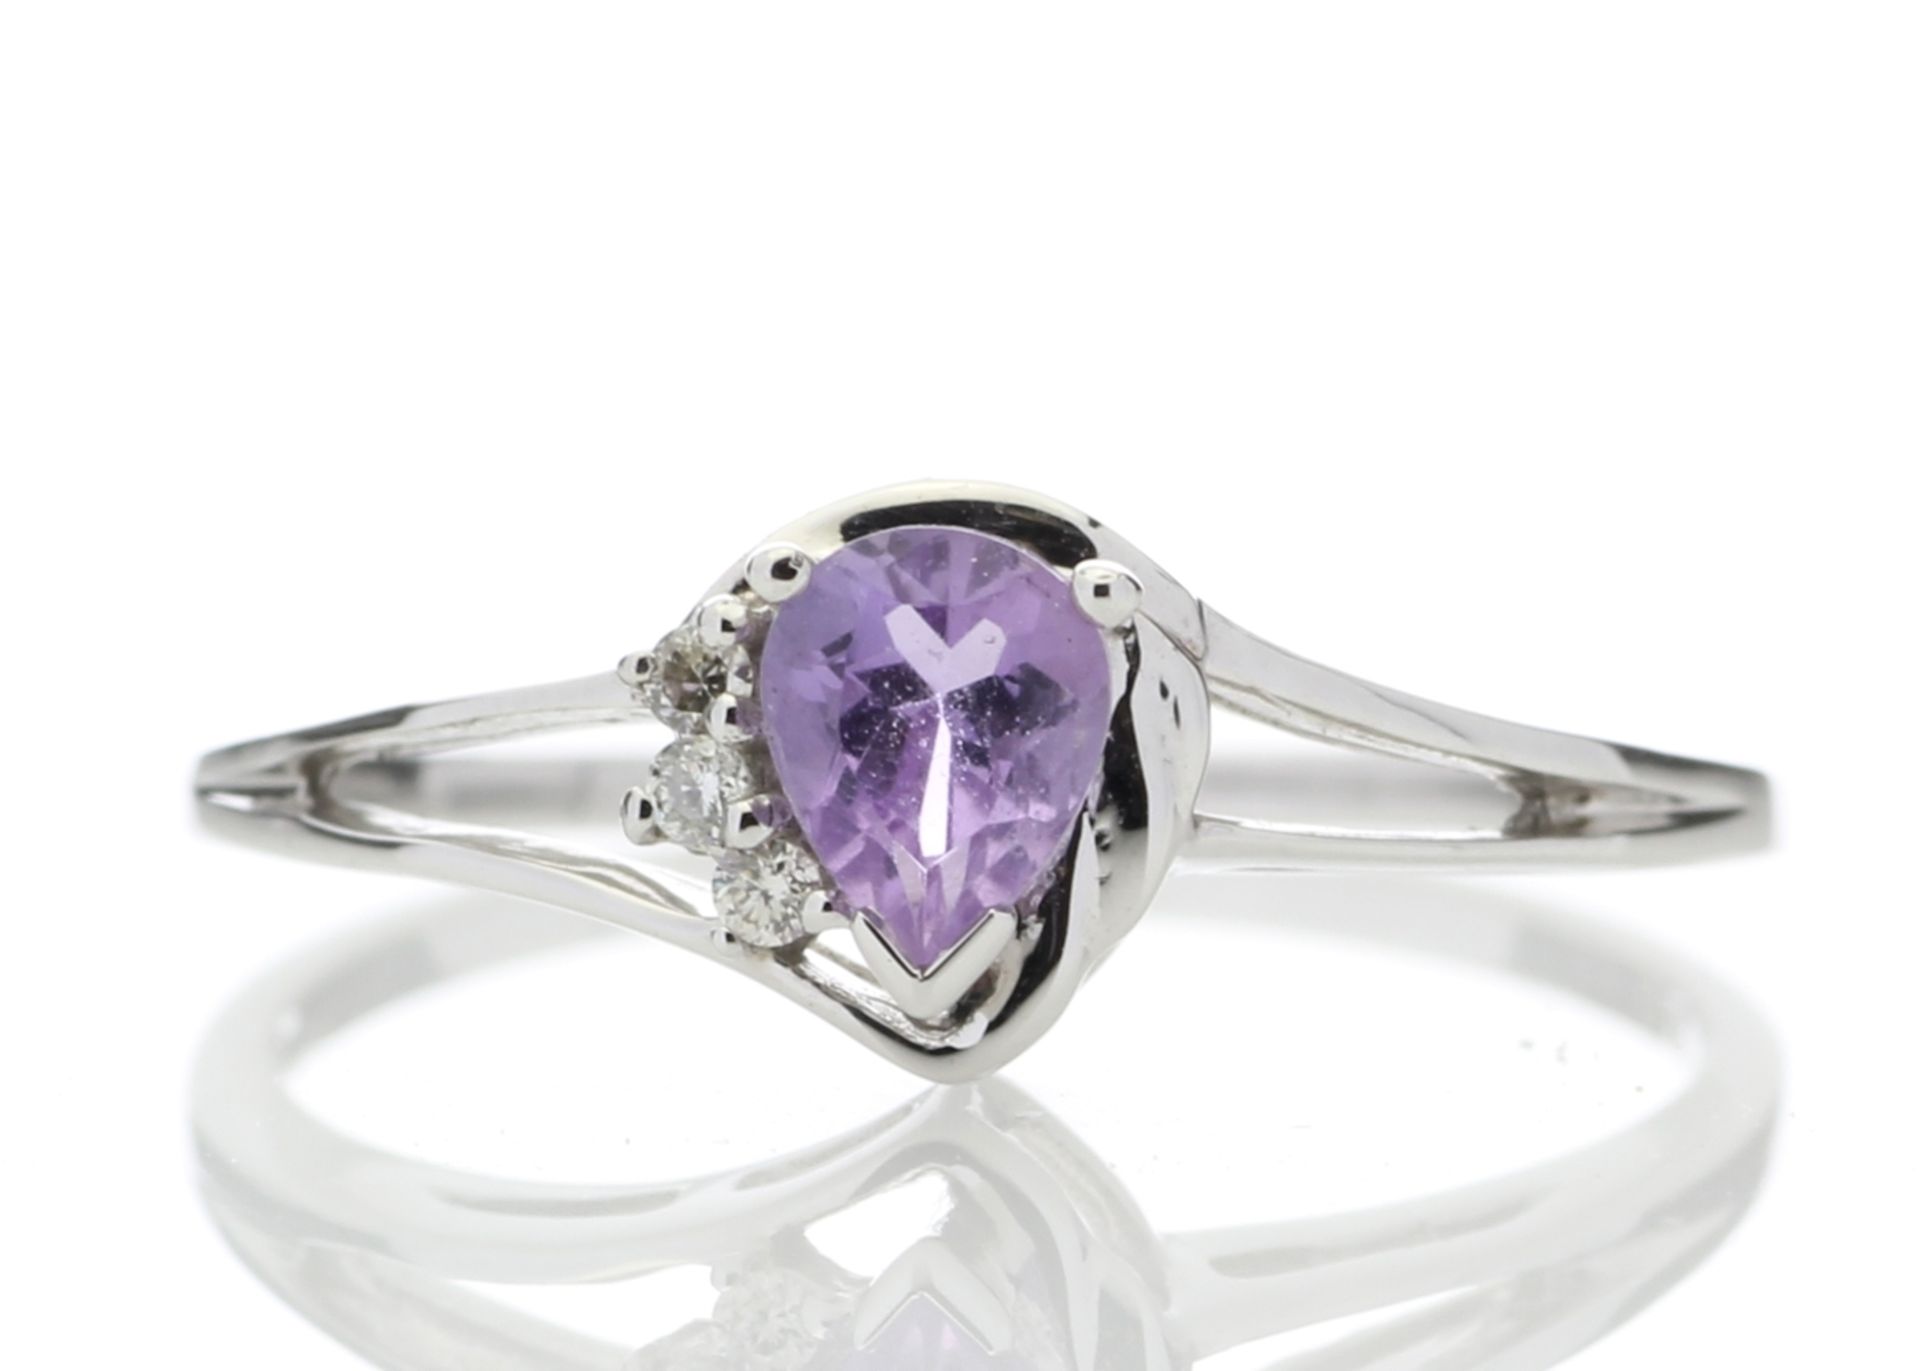 9ct White Gold Amethyst Pear Shaped Diamond Ring 0.03 Carats